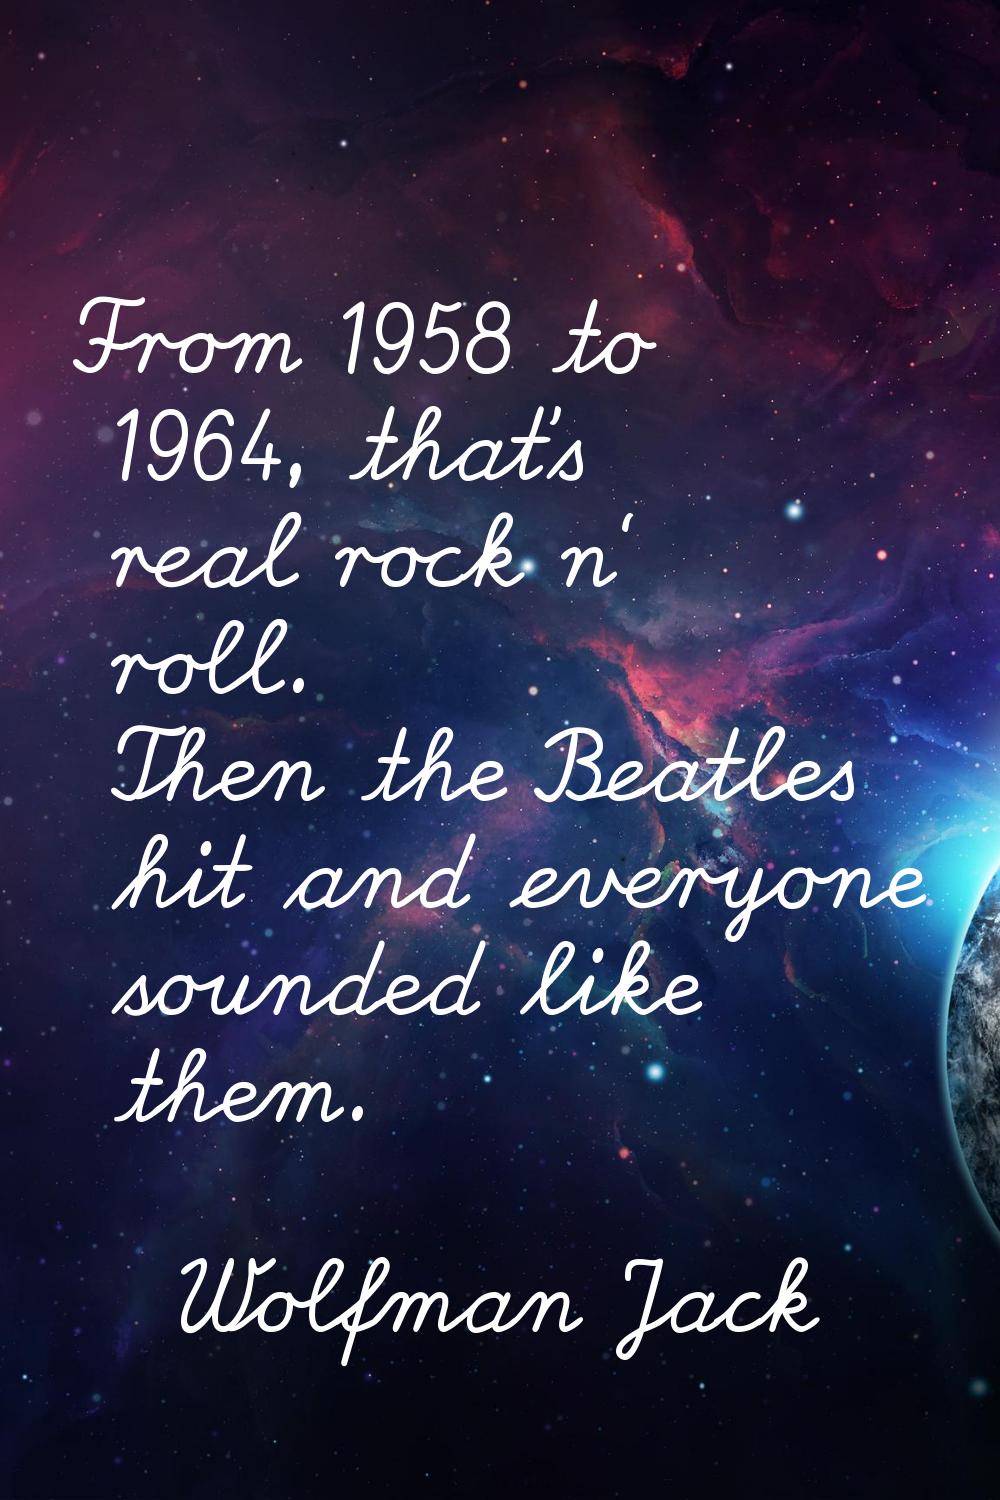 From 1958 to 1964, that's real rock n' roll. Then the Beatles hit and everyone sounded like them.